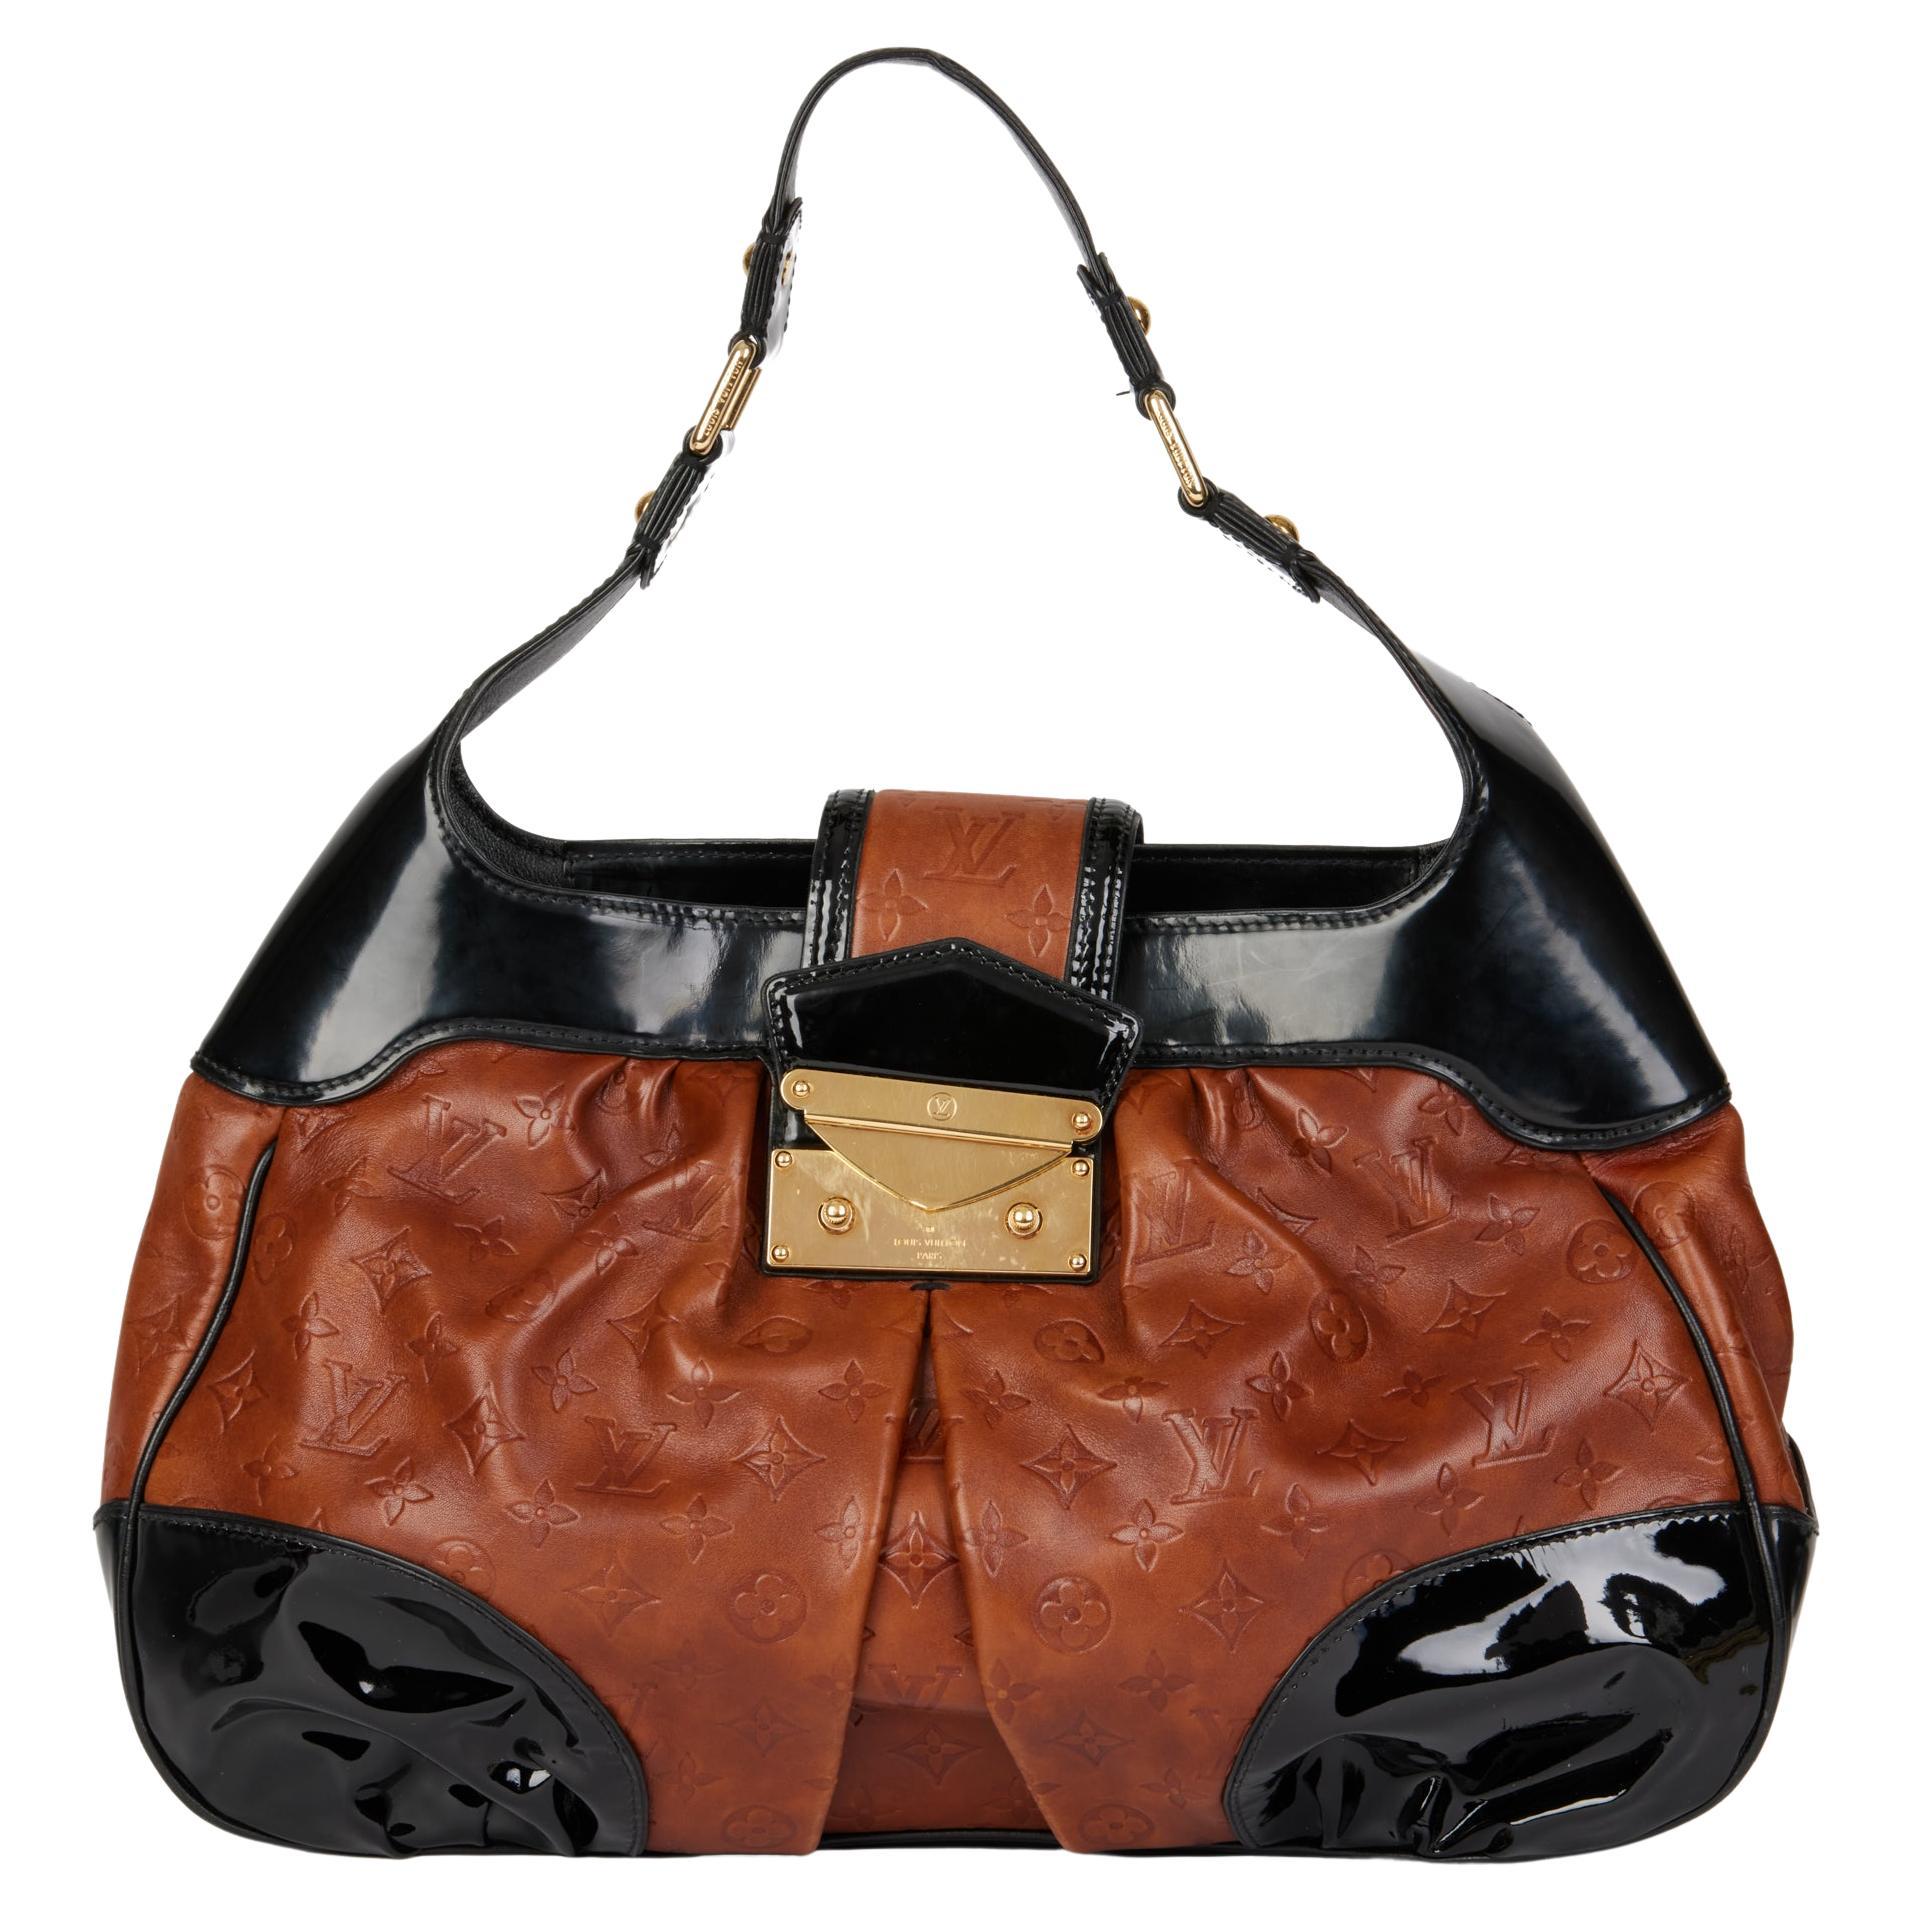 LOUIS VUITTON Black Patent Leather & Caramel Embossed Calfskin Leather Polly